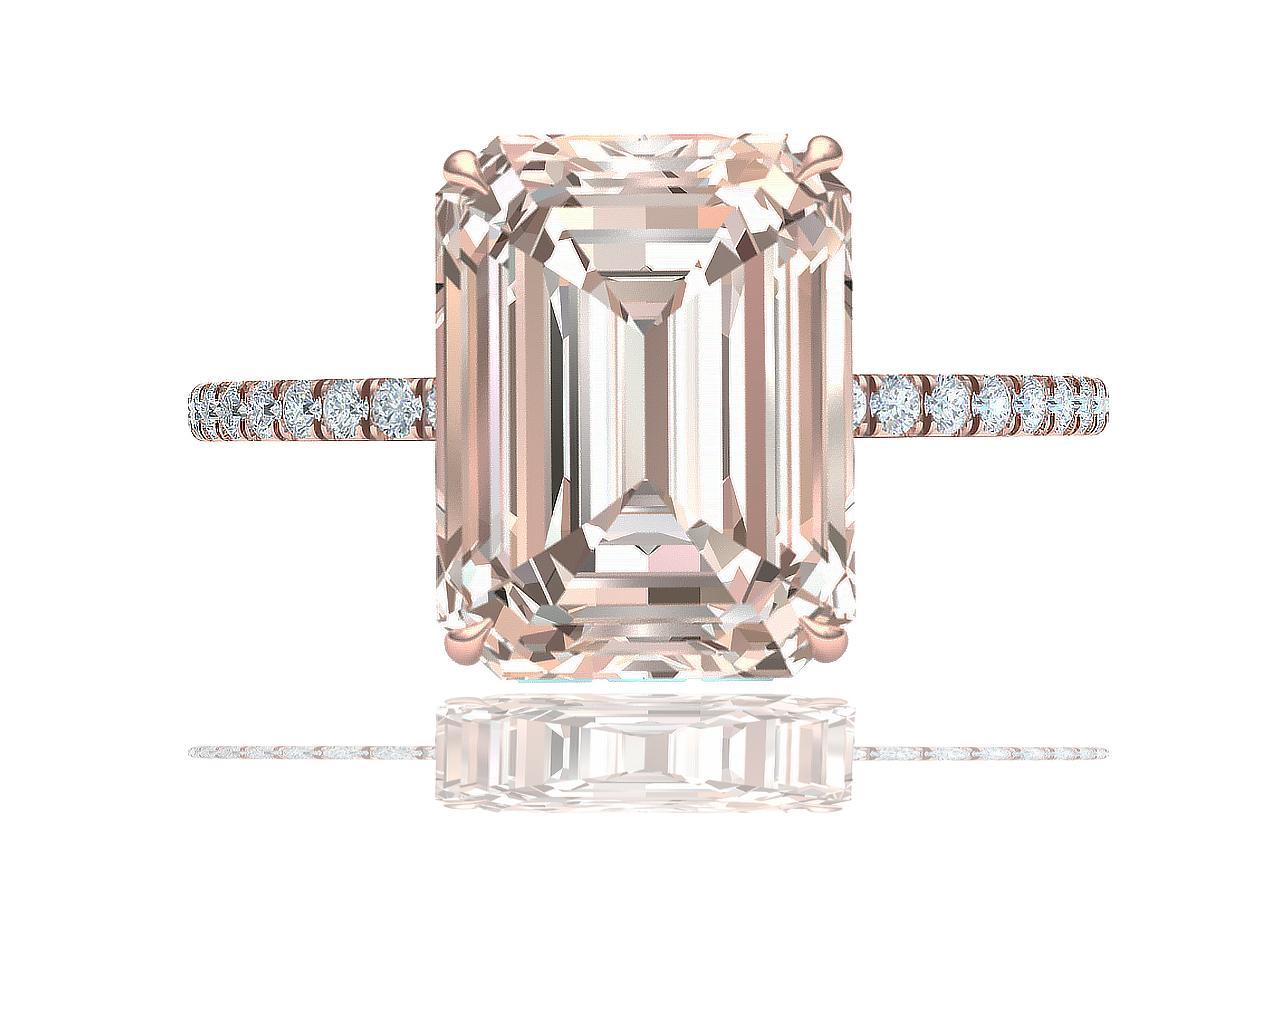 The beauty of rose gold captured in a diamond can be seen in the center stone of this truly one-of-a-kind engagement ring.  The center of this ring showcases a 5-carat emerald-cut which has a color and clarity of Light Brown and VS clarity.  The